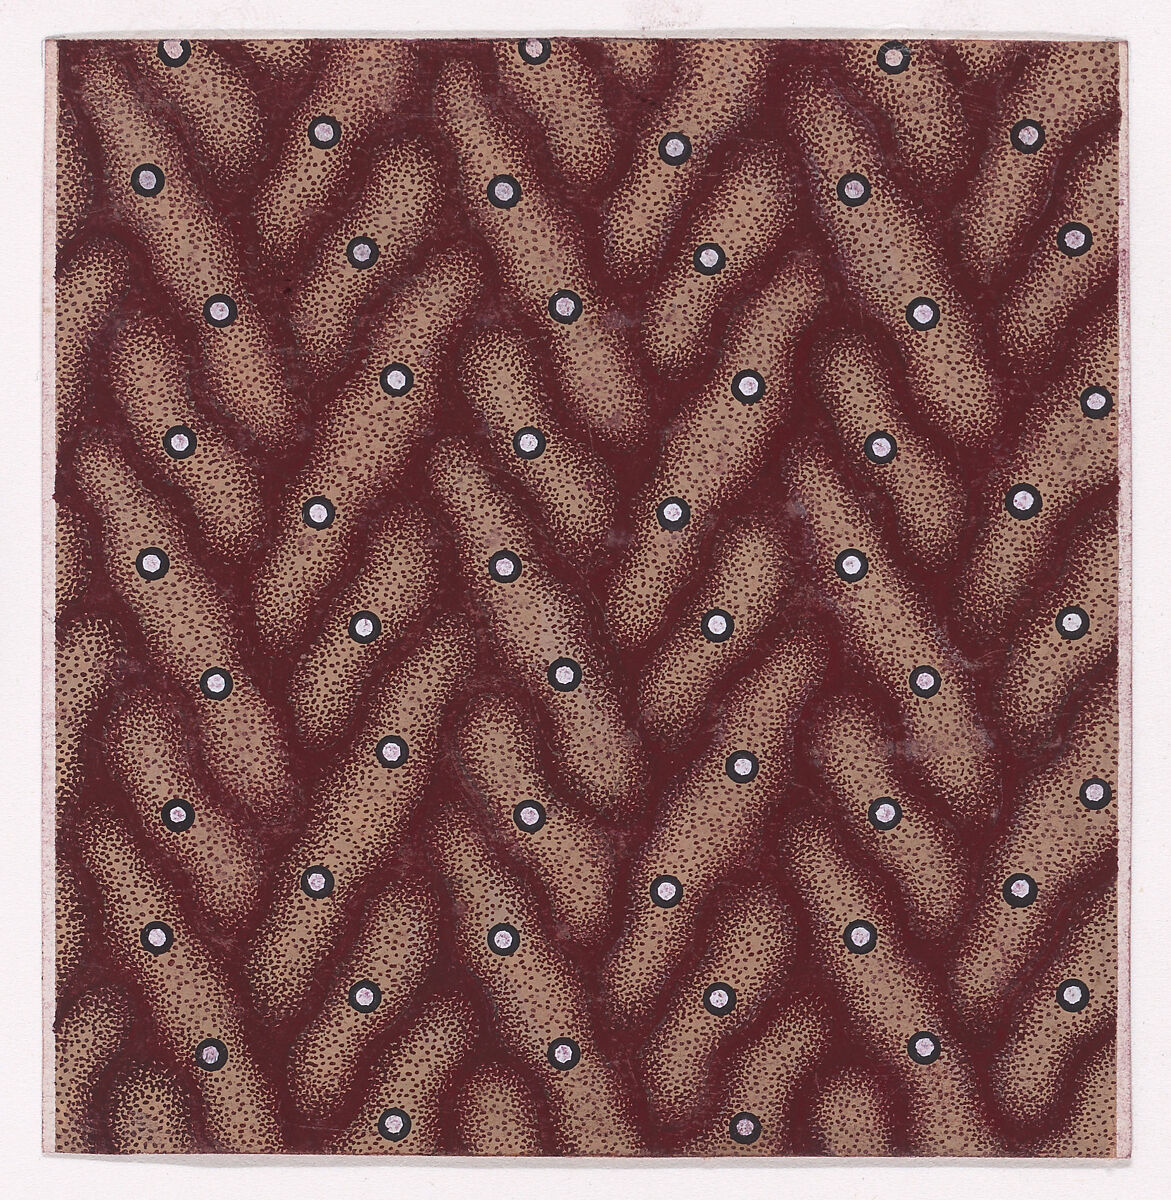 Textile Design with Scattered Pearls over an Abstract Background, Anonymous, Alsatian, 19th century, Gouache 